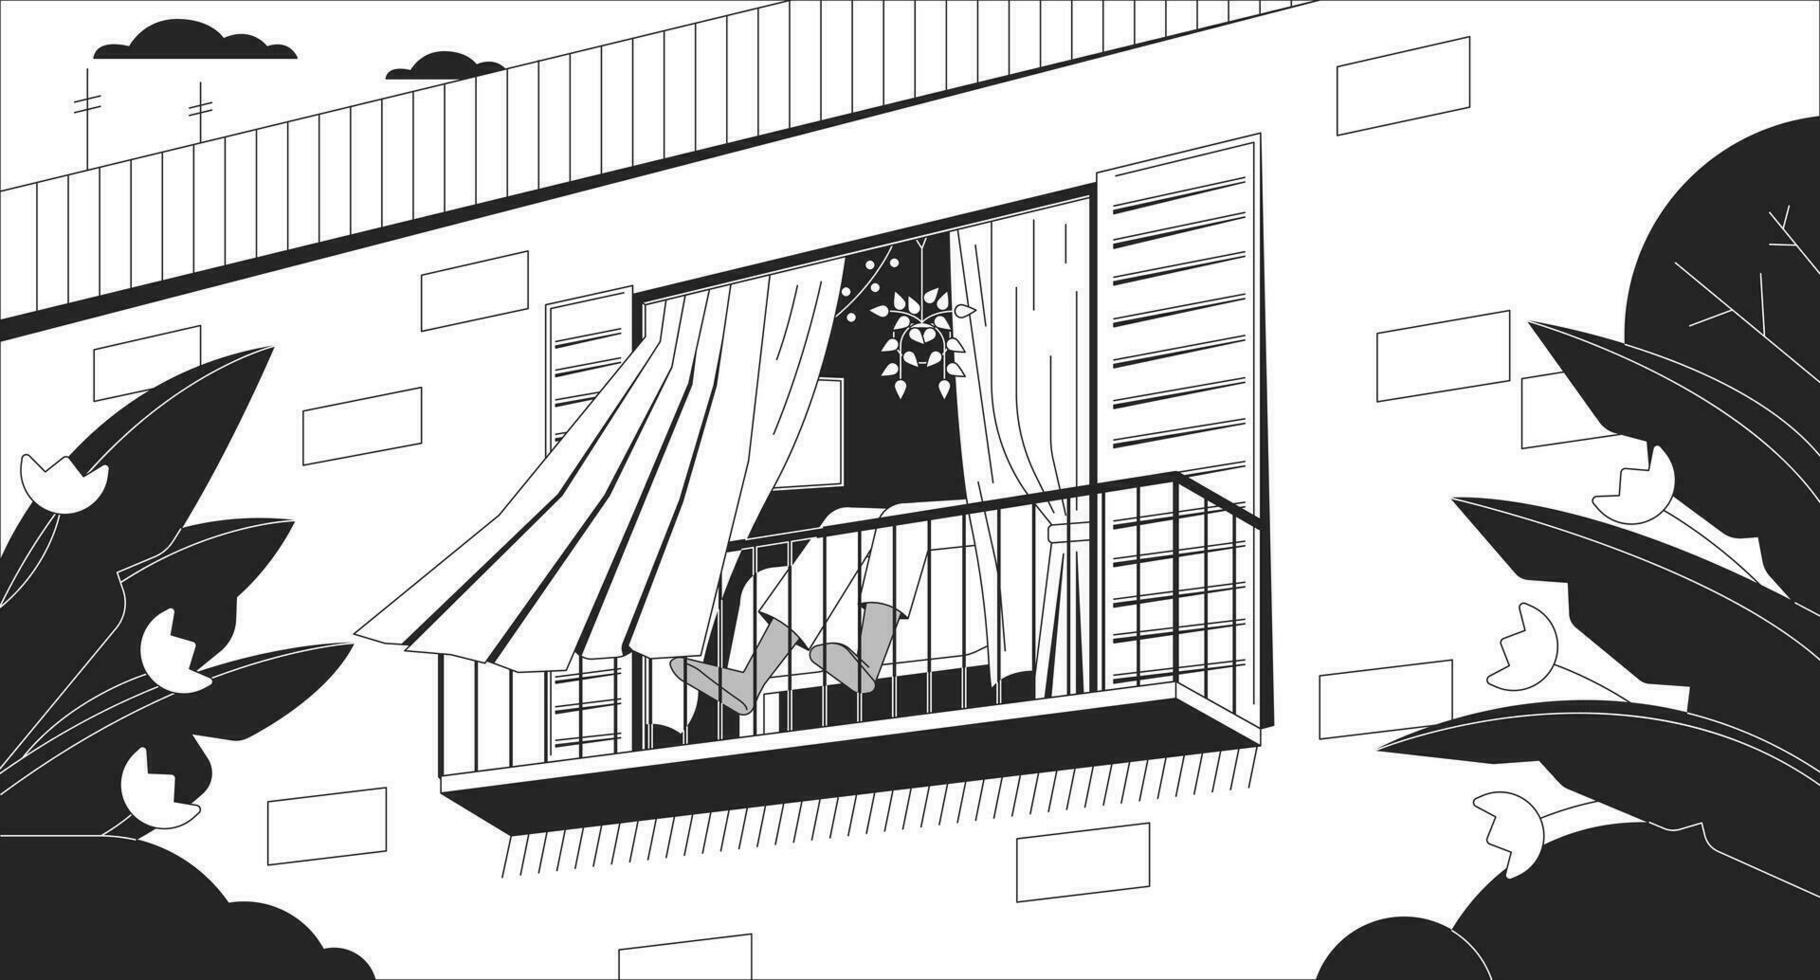 Relax on balcony black and white lo fi aesthetic wallpaper. Curtains blowing in wind outline 2D vector cartoon interior illustration, monochrome lofi background. Bw 90s retro album art, chill vibes